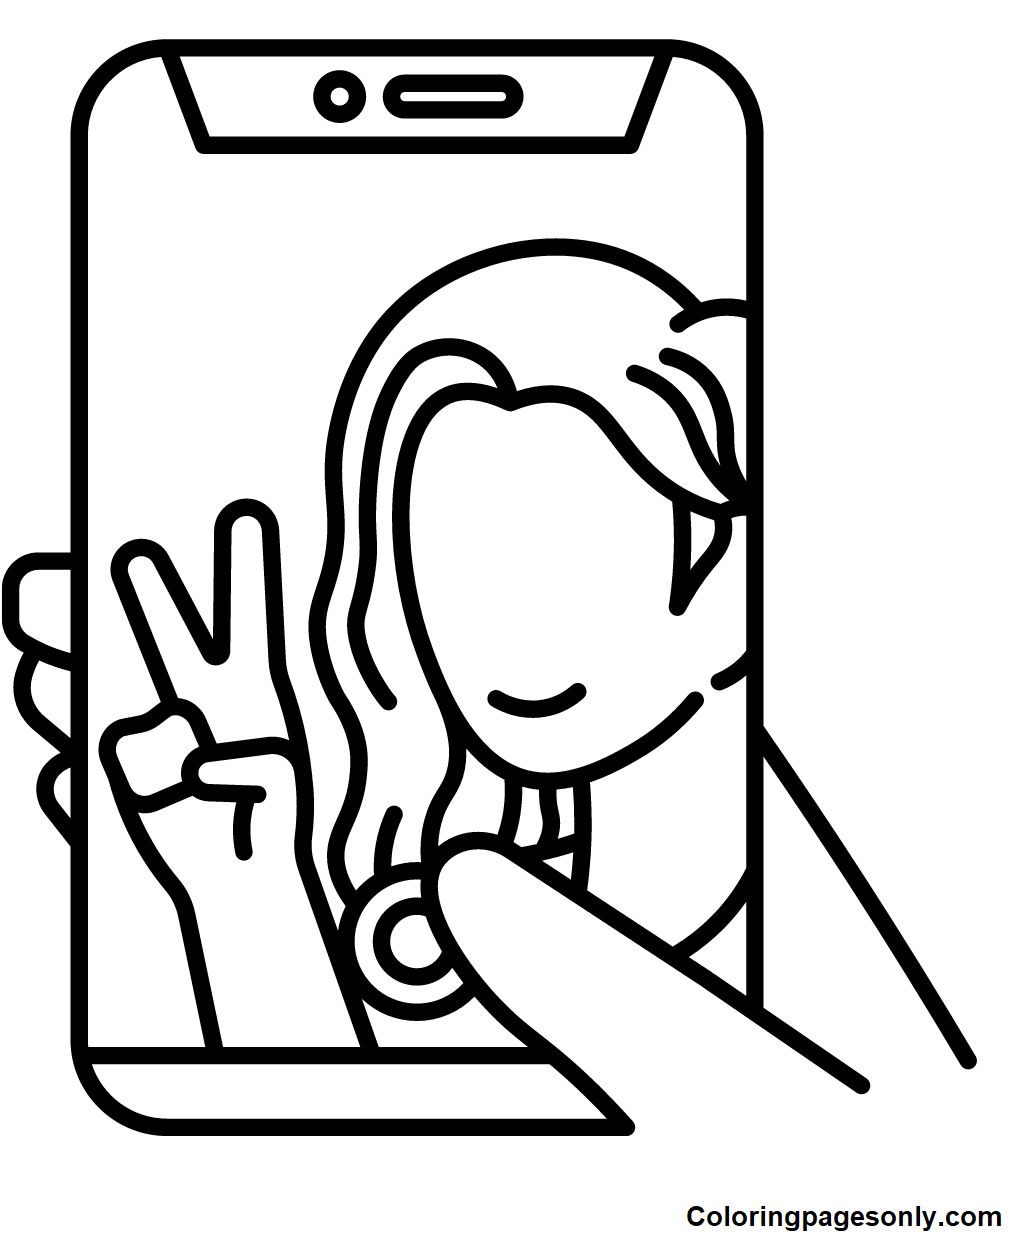 Selfie with Phone Coloring Page